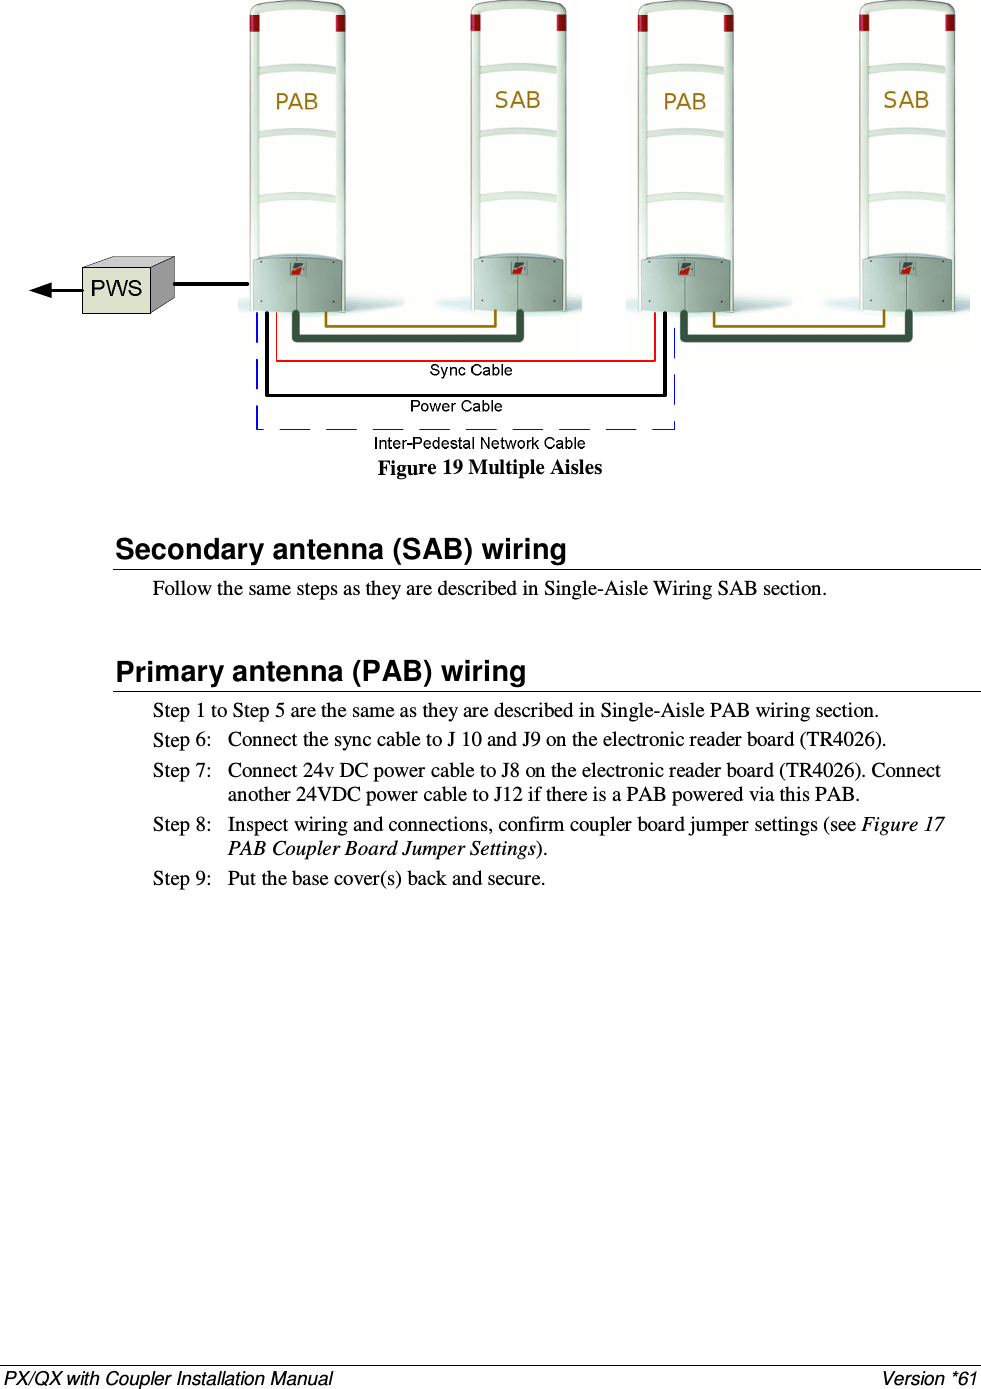 PX/QX with Coupler Installation Manual    Version *61   Figure 19 Multiple Aisles  Secondary antenna (SAB) wiring Follow the same steps as they are described in Single-Aisle Wiring SAB section.  Primary antenna (PAB) wiring Step 1 to Step 5 are the same as they are described in Single-Aisle PAB wiring section. Step 6:  Connect the sync cable to J 10 and J9 on the electronic reader board (TR4026). Step 7:  Connect 24v DC power cable to J8 on the electronic reader board (TR4026). Connect another 24VDC power cable to J12 if there is a PAB powered via this PAB. Step 8:  Inspect wiring and connections, confirm coupler board jumper settings (see Figure 17 PAB Coupler Board Jumper Settings). Step 9:  Put the base cover(s) back and secure.  